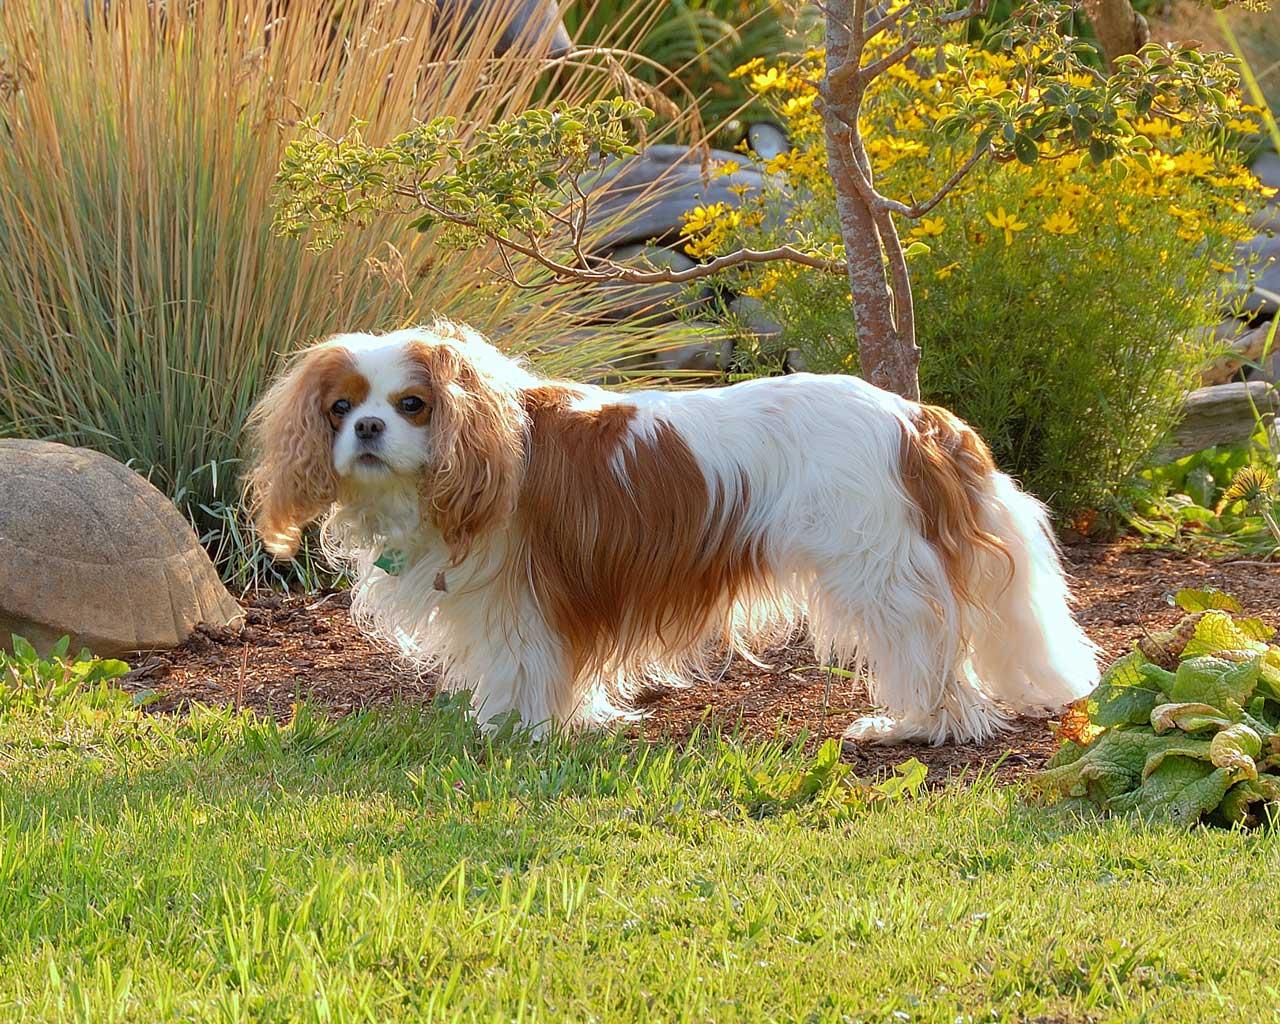 English Toy Spaniel - Cavalier King Charles in the Garden Wallpaper #3 1280 x 1024 